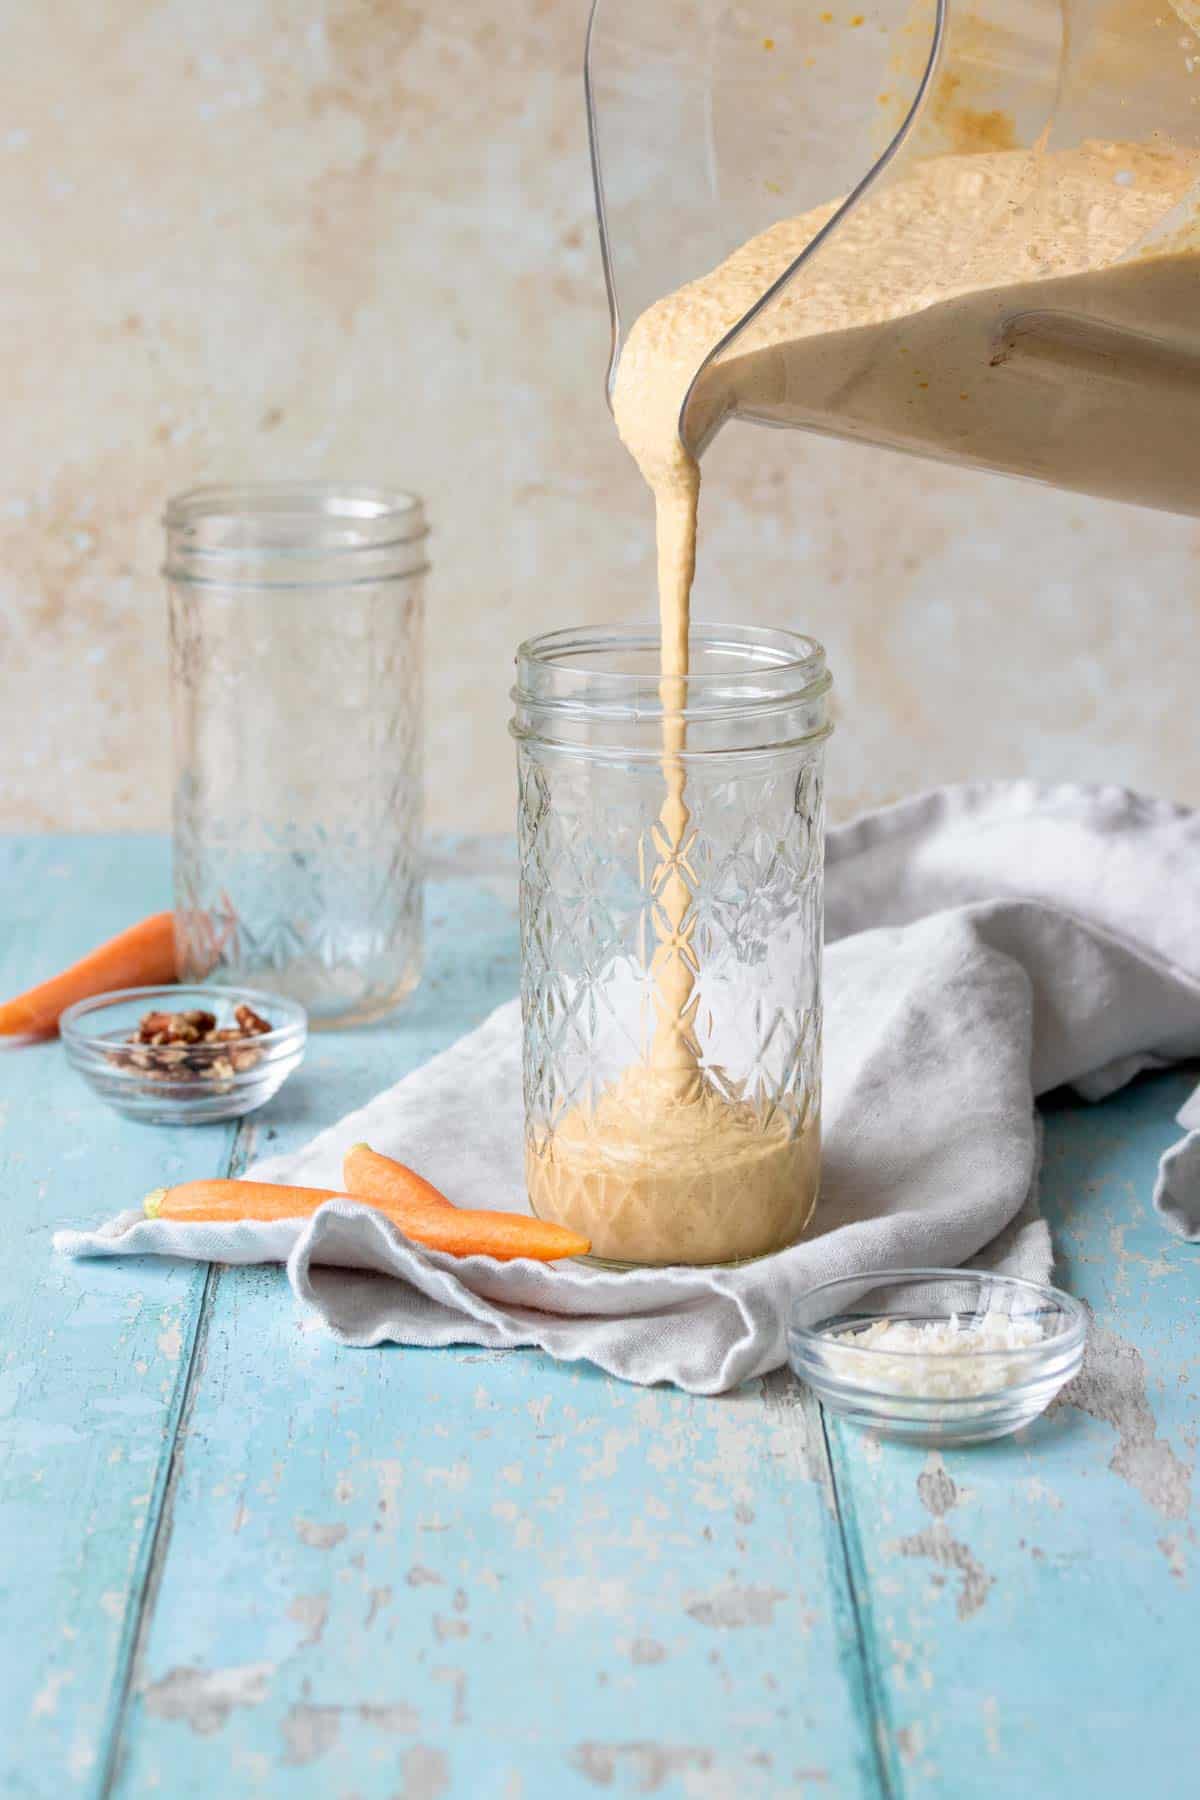 A blender pouring a peach colored smoothie into a glass jar on a blue wooden surface